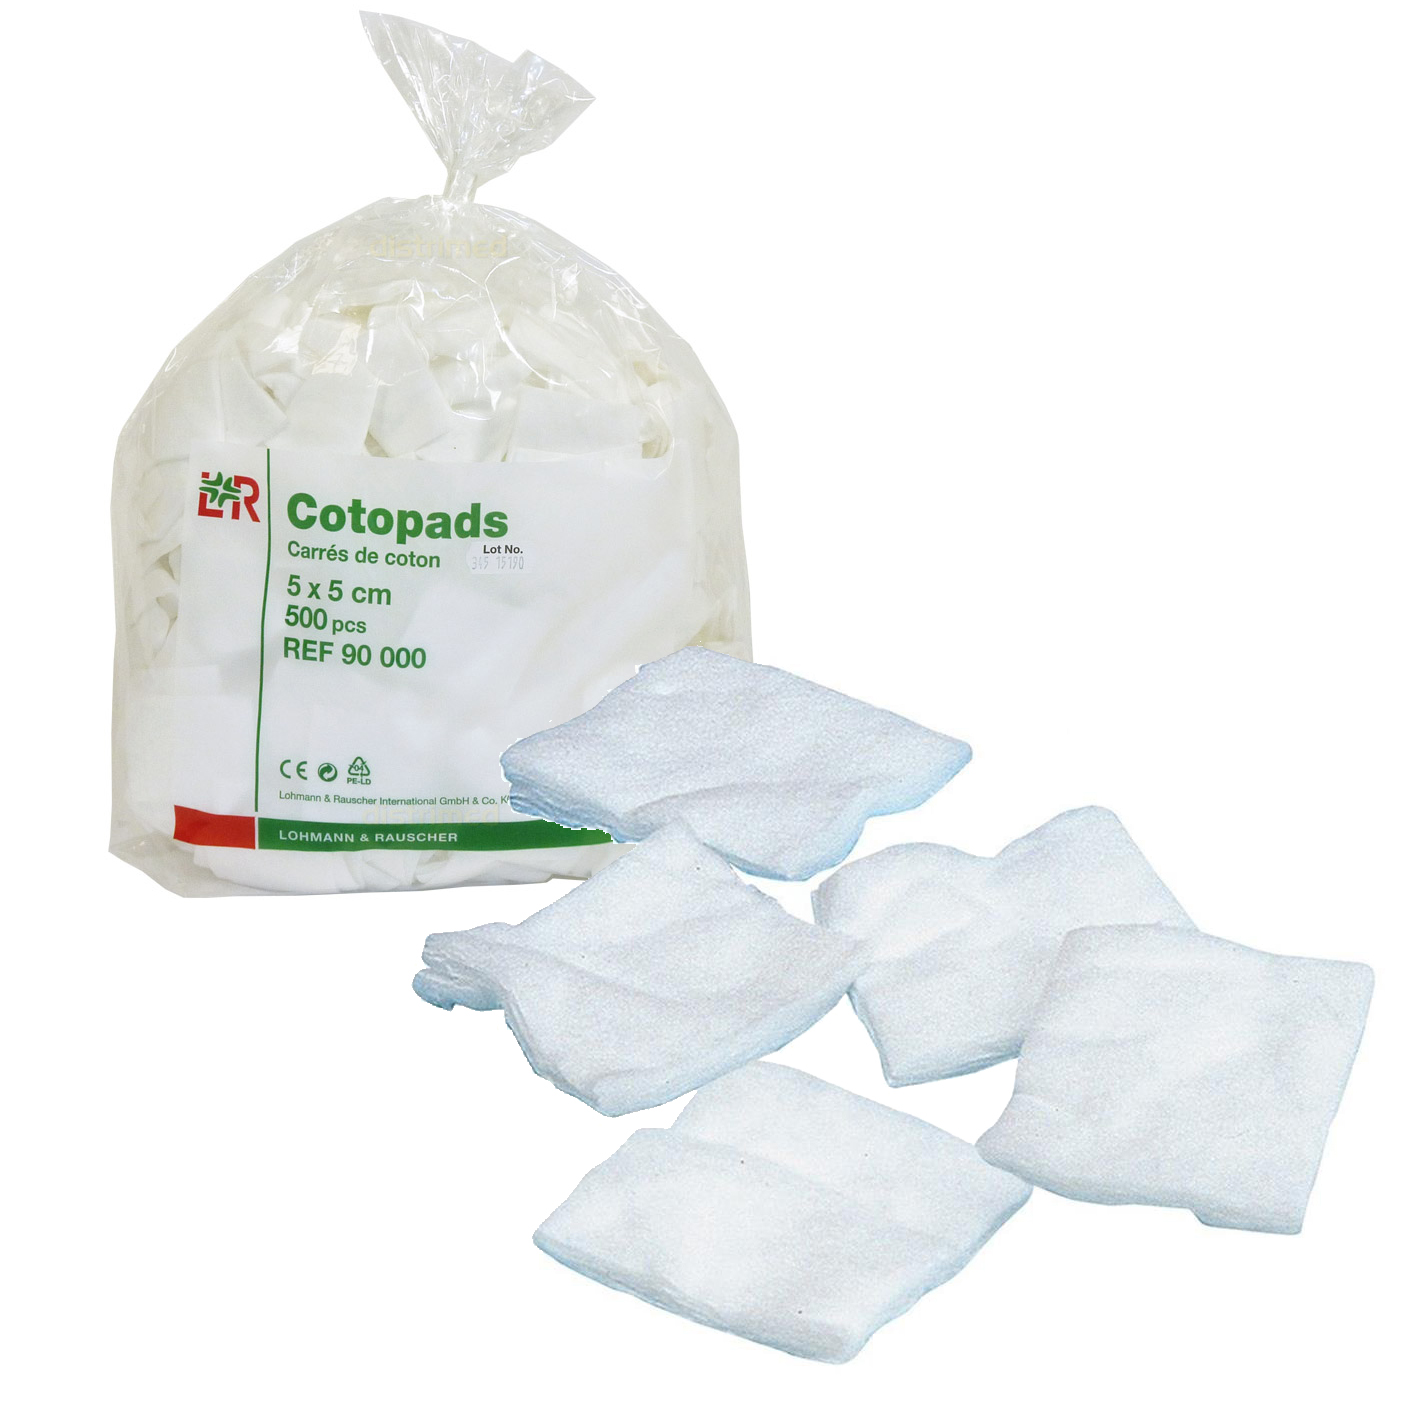 Coton hydrophile chirurgical 250 grammes